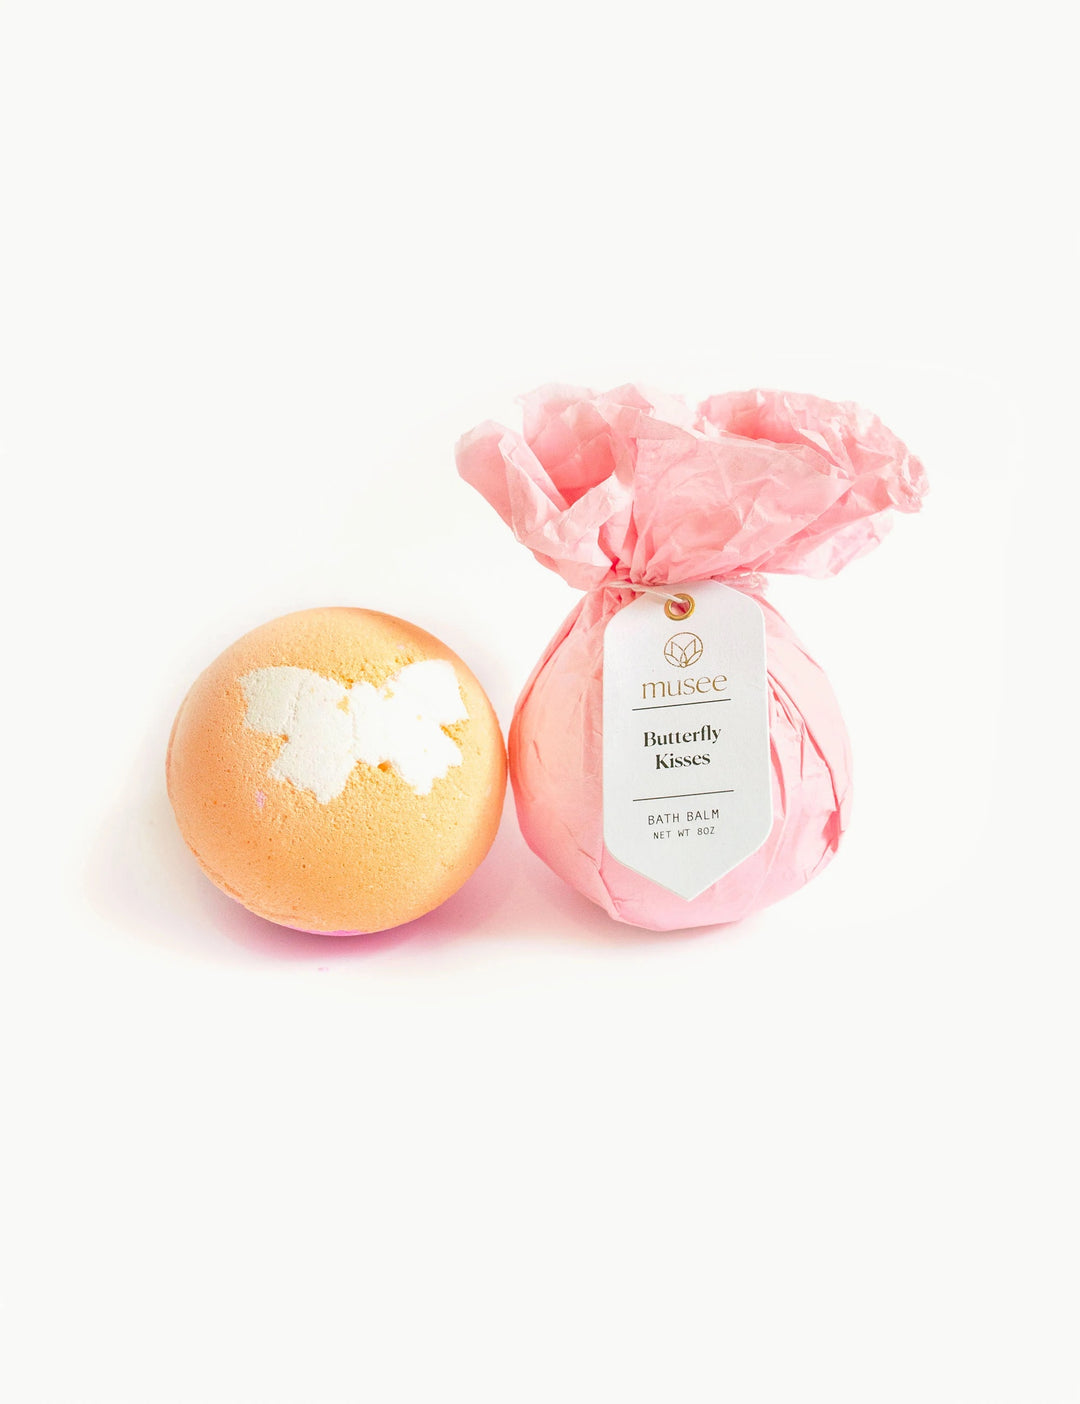 Butterfly Kisses Bath Balm By Musee - Bloom and Petal